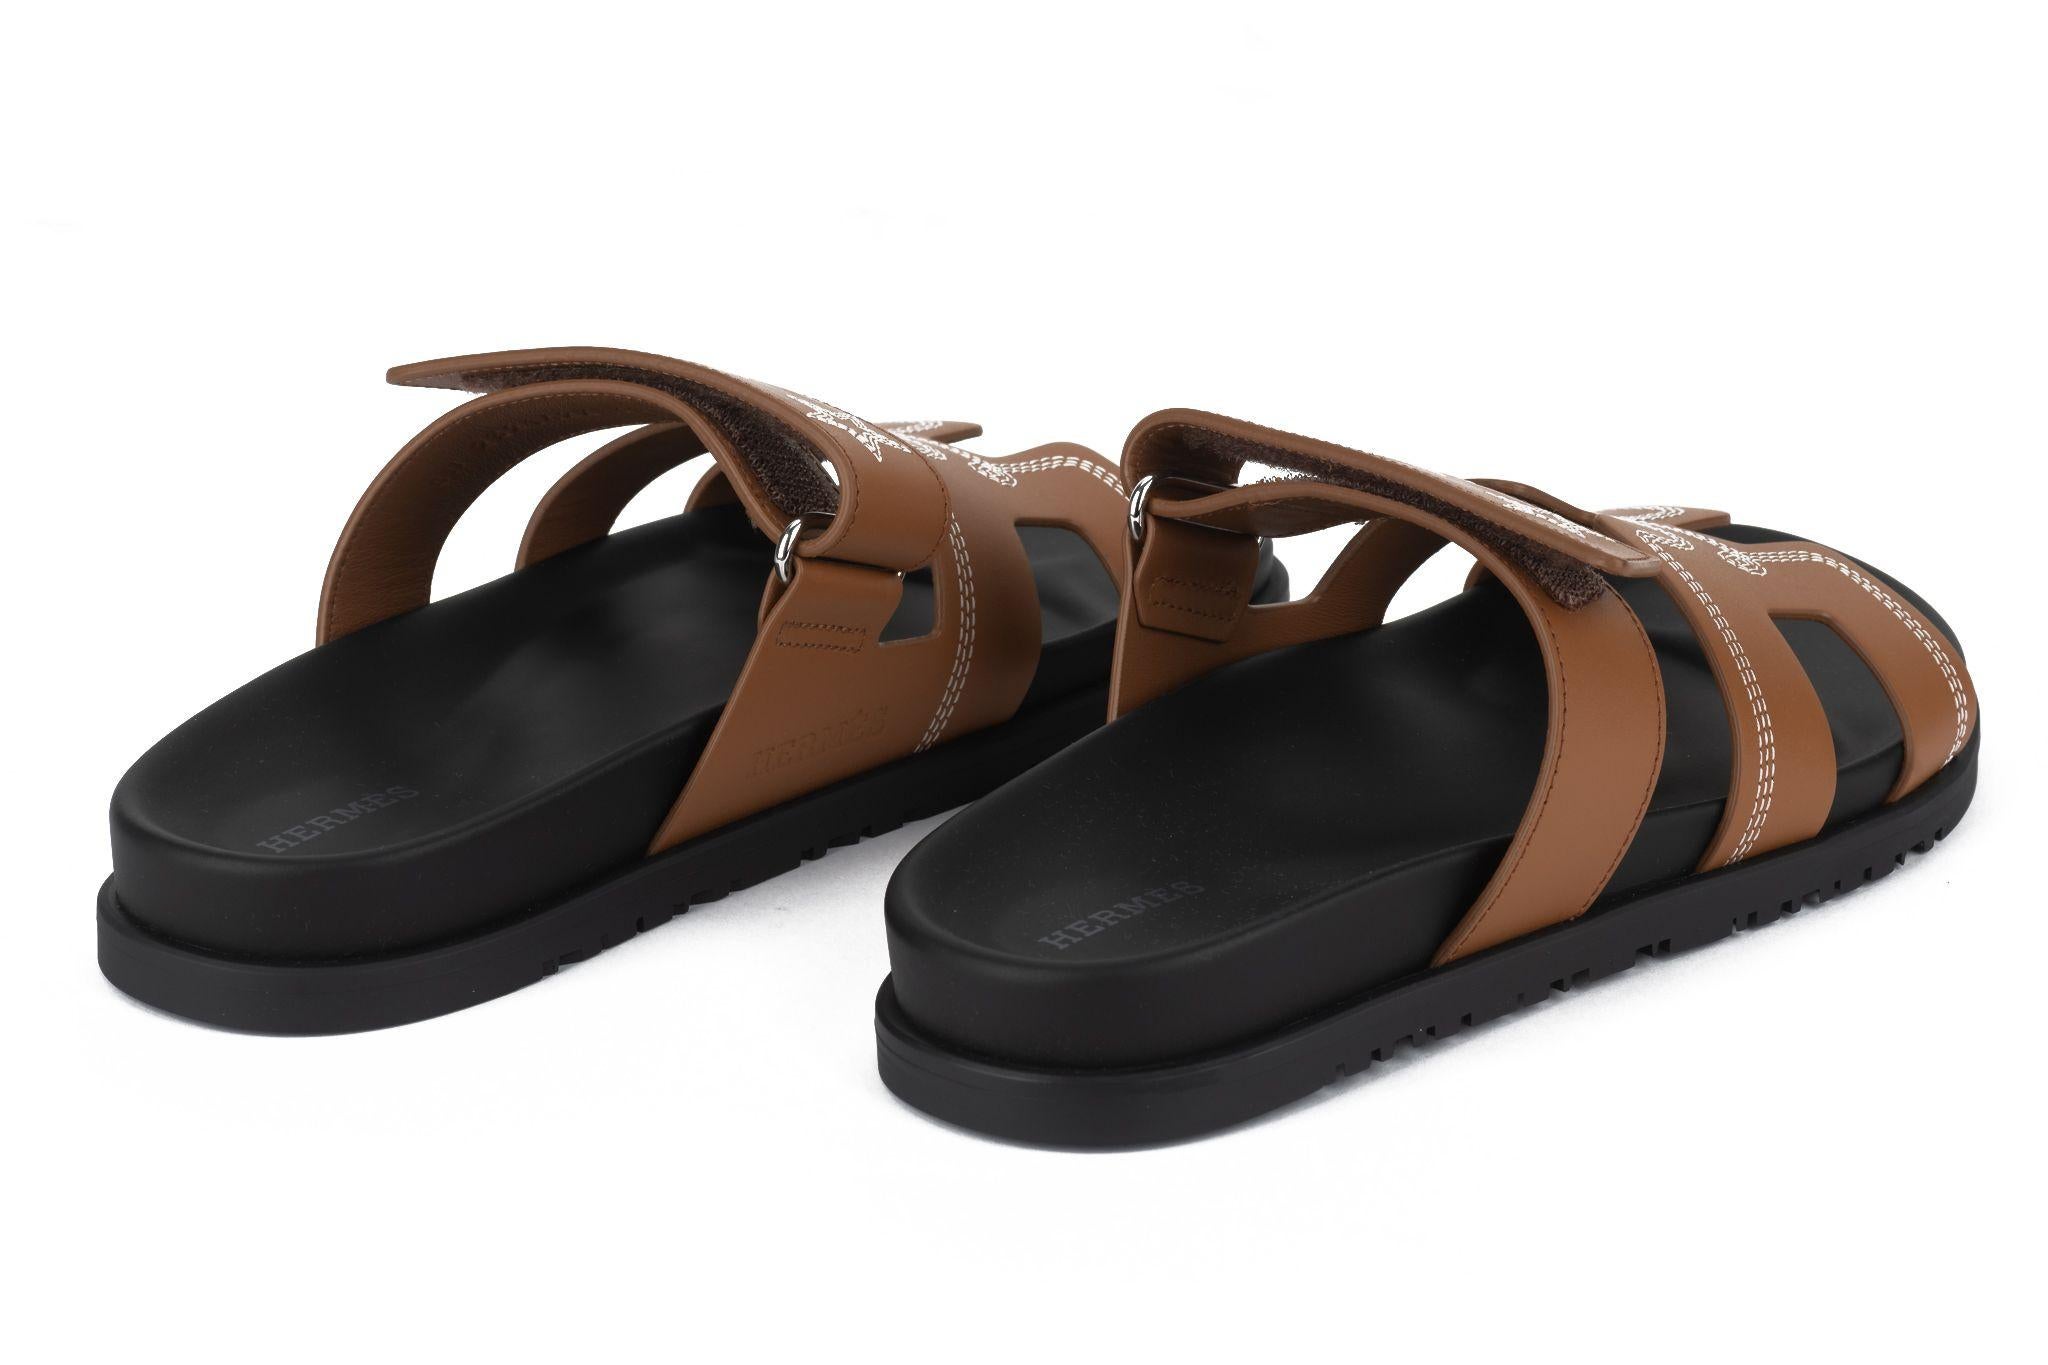 Hermès Chypre Techno-sandal in calfskin with rubber sole and adjustable strap.
Black calfskin insole and goatskin lining, gold leather upper with contrast white stitching.
European size 38. Come with 2 dust covers and original box.